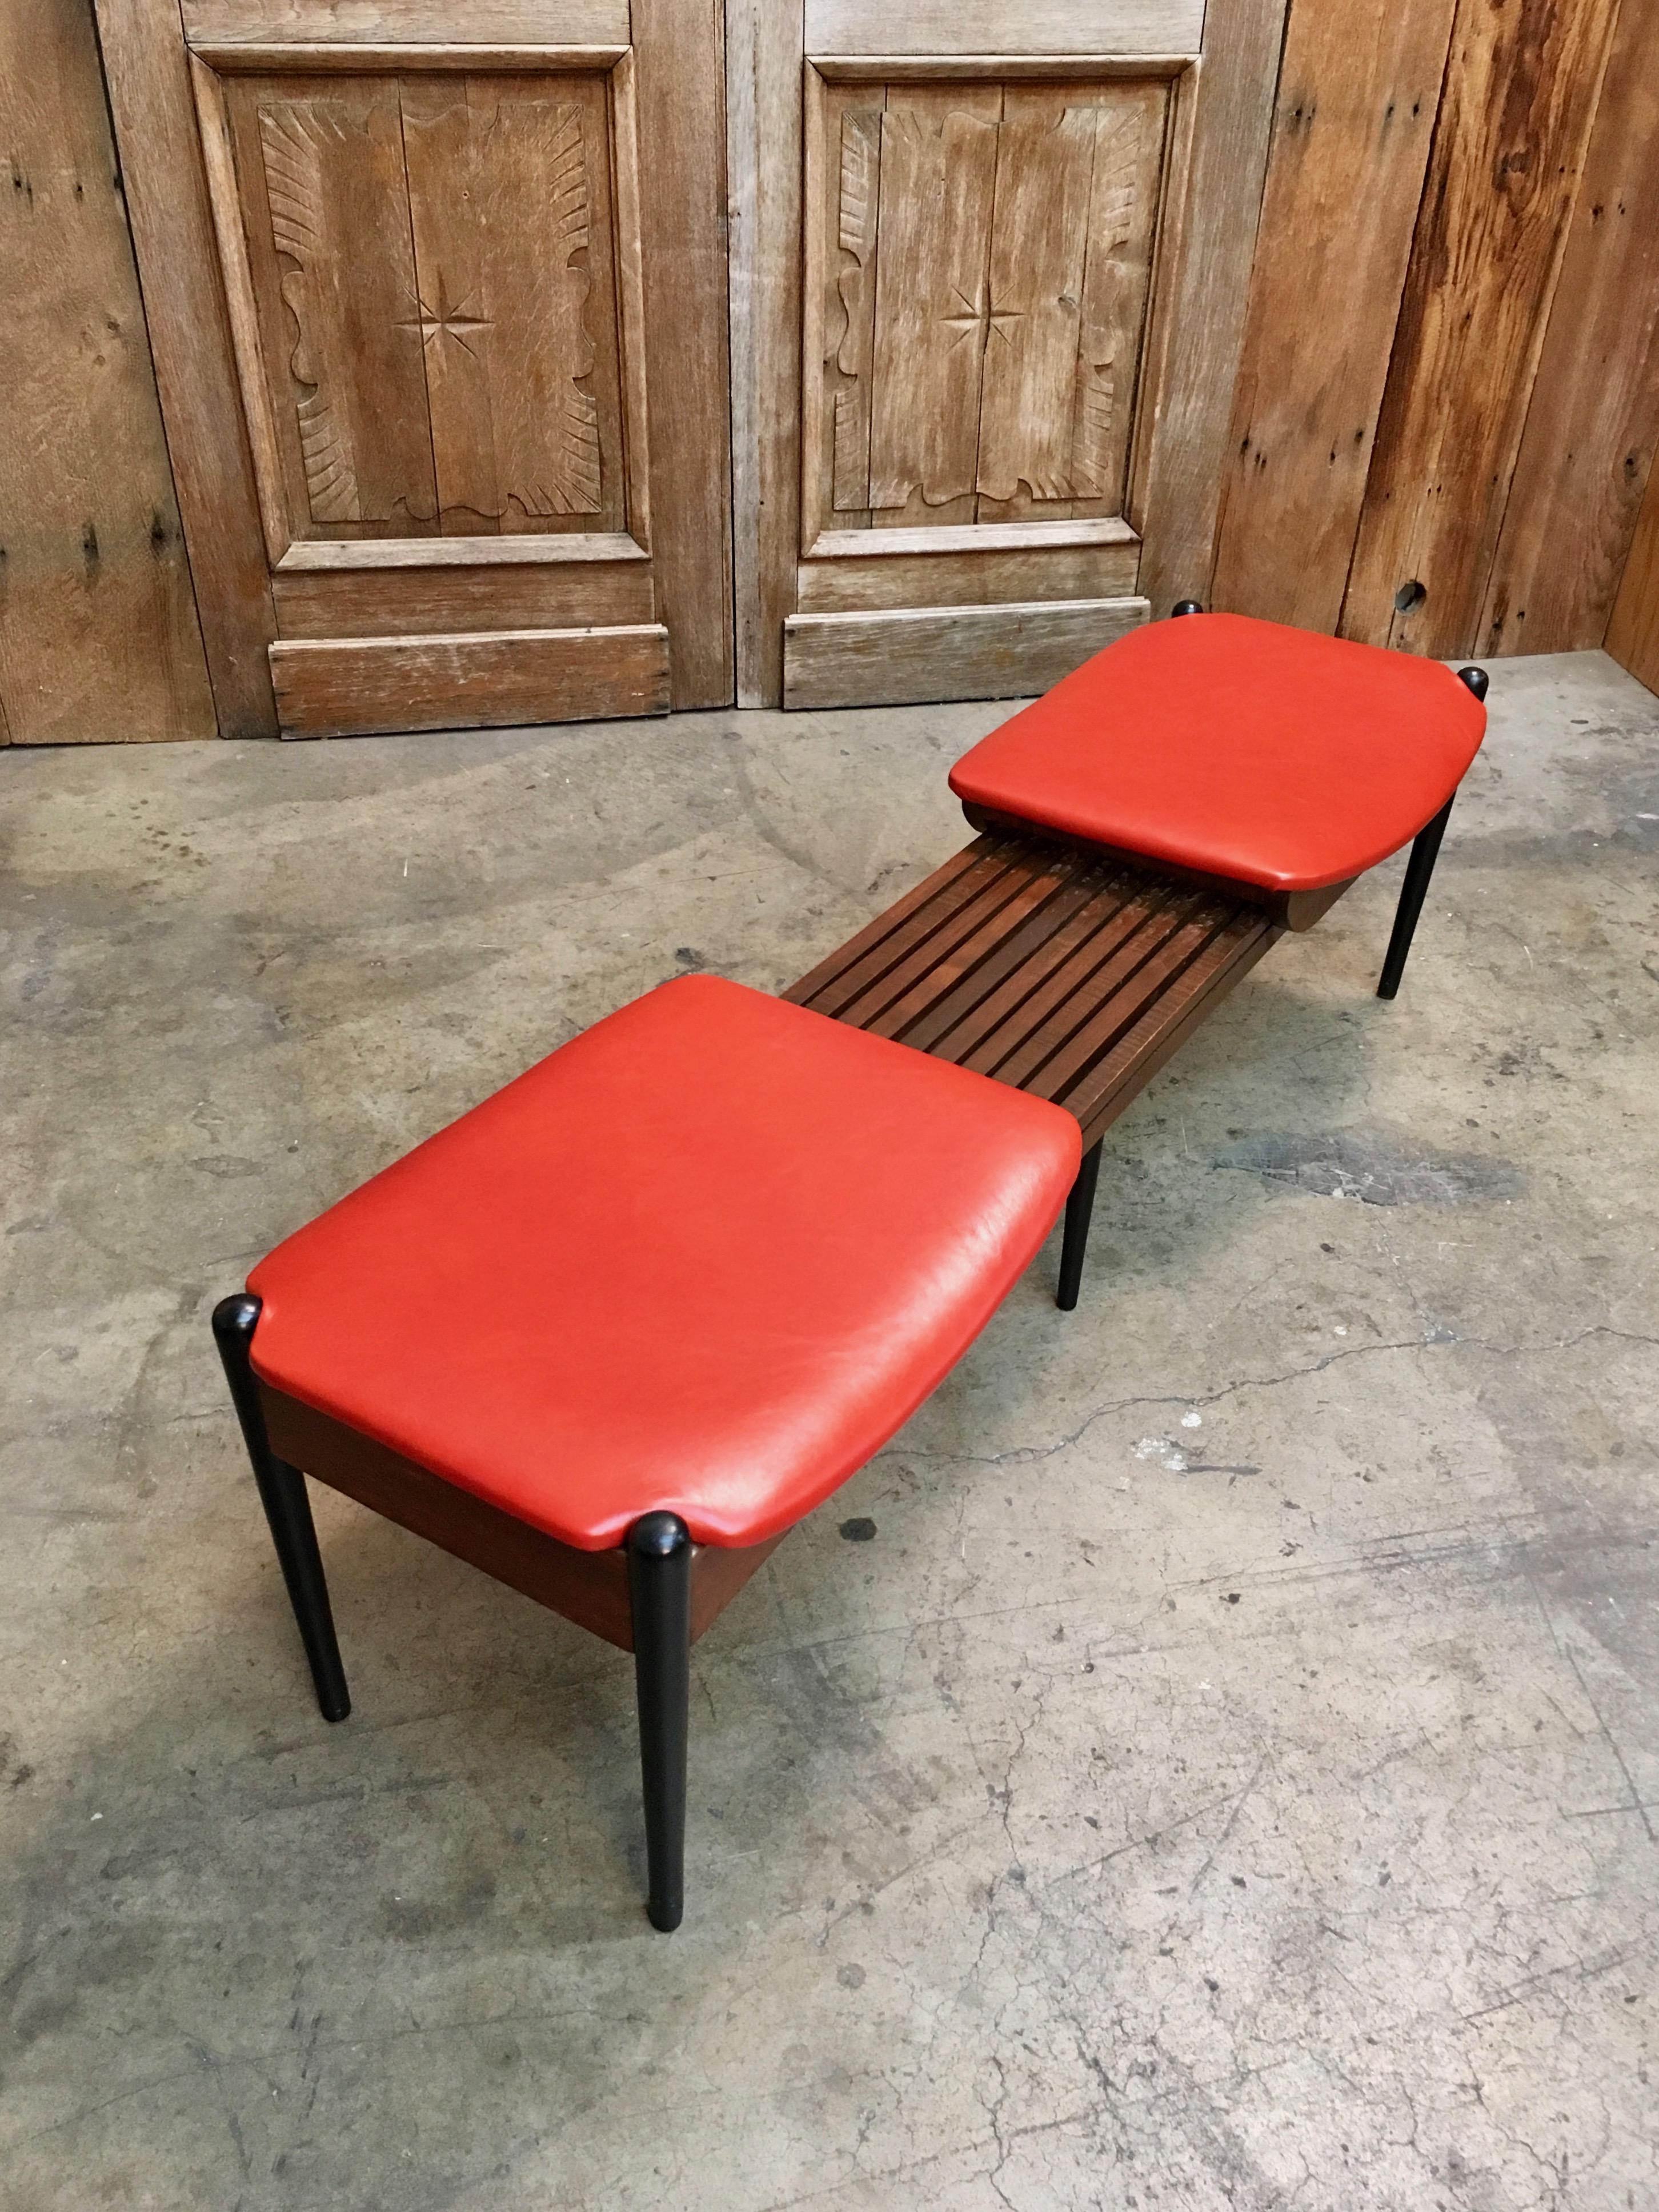 Orange leather upholstery on top of this retractable slat bench
42